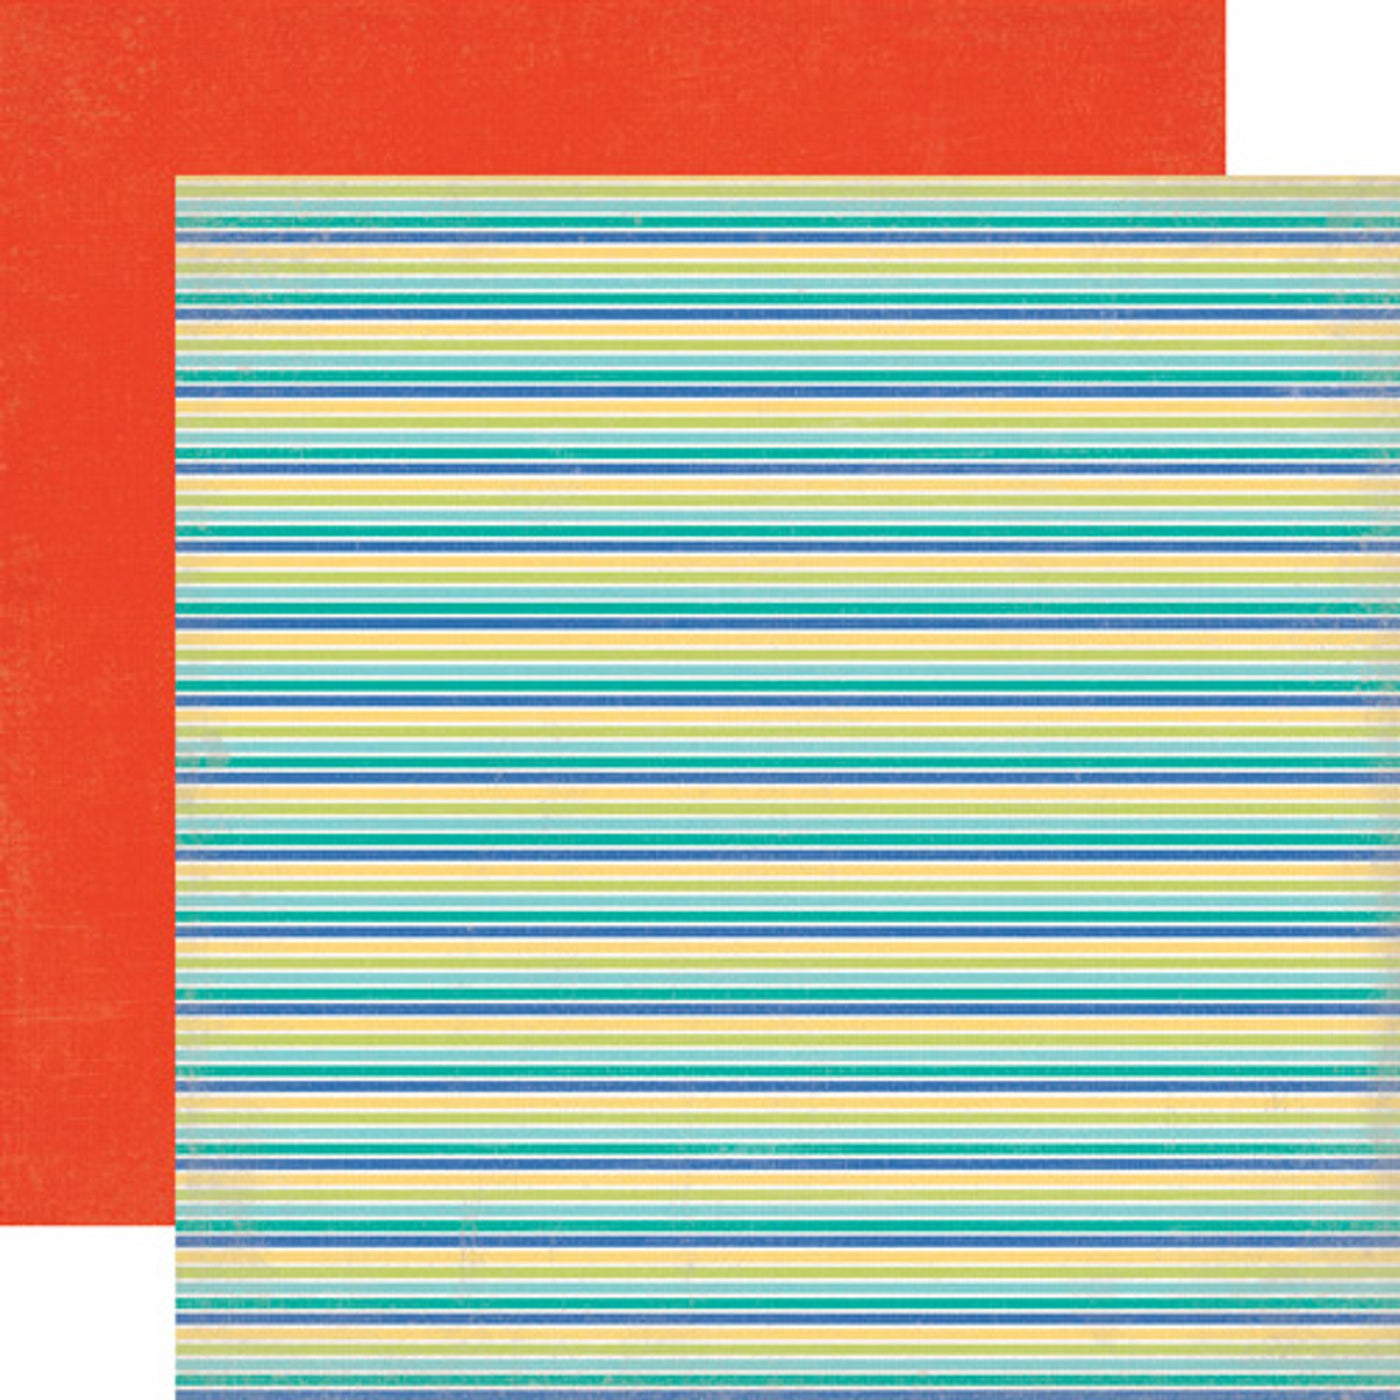 12x12 double-sided sheet. (Side A - fun, colorful summertime stripes in blues, green, and yellow. Side B - a distressed reddish-orange background) Archival quality, acid-free. 